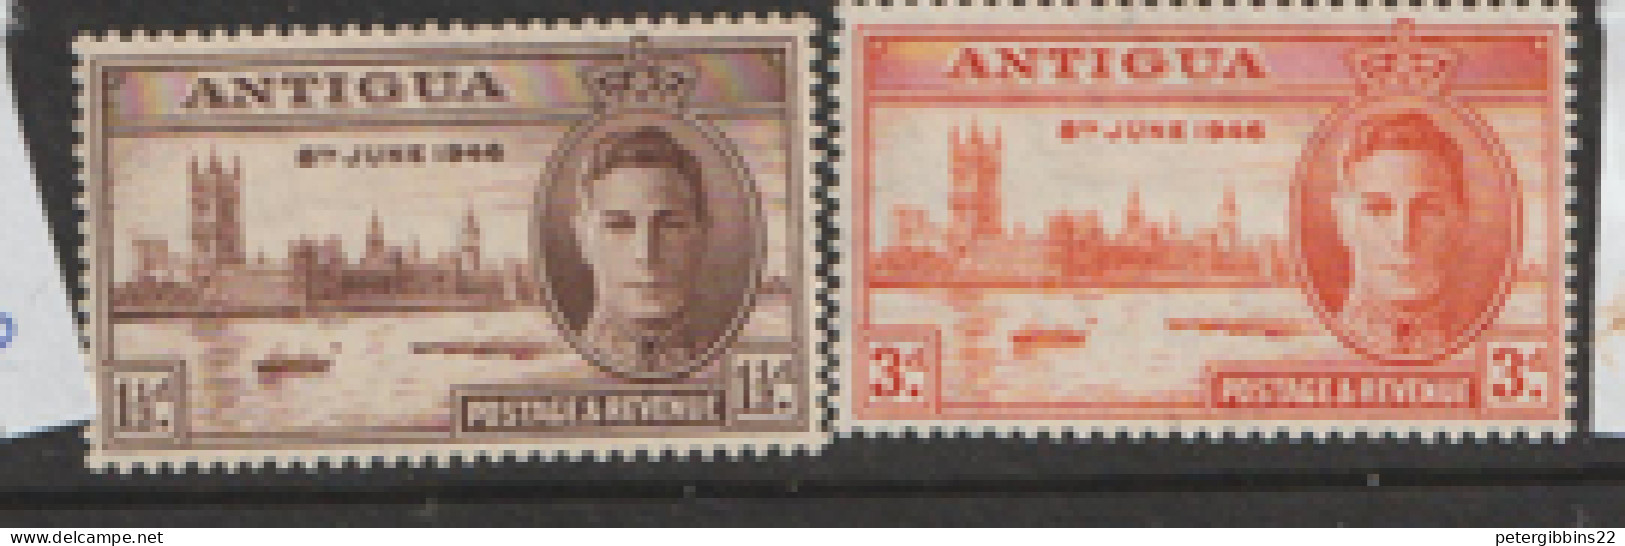 Antigua   1946  SG  110-1  Victory   Mounted Mint - 1858-1960 Colonia Británica